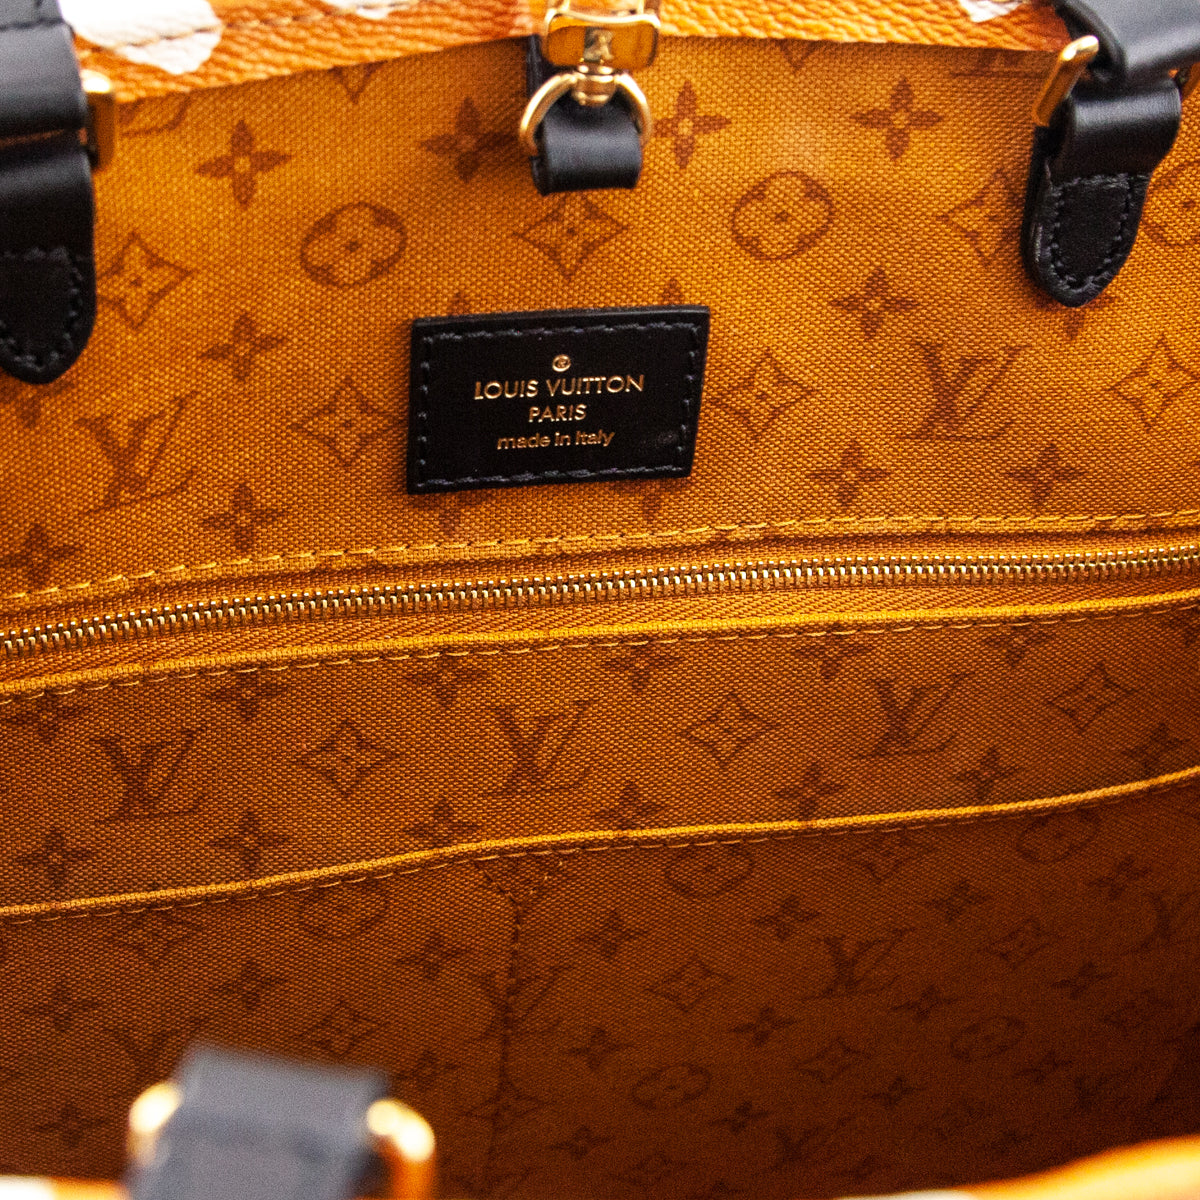 Is it Worth it?! HONEST Louis Vuitton Crafty Collection Review & Unboxing 